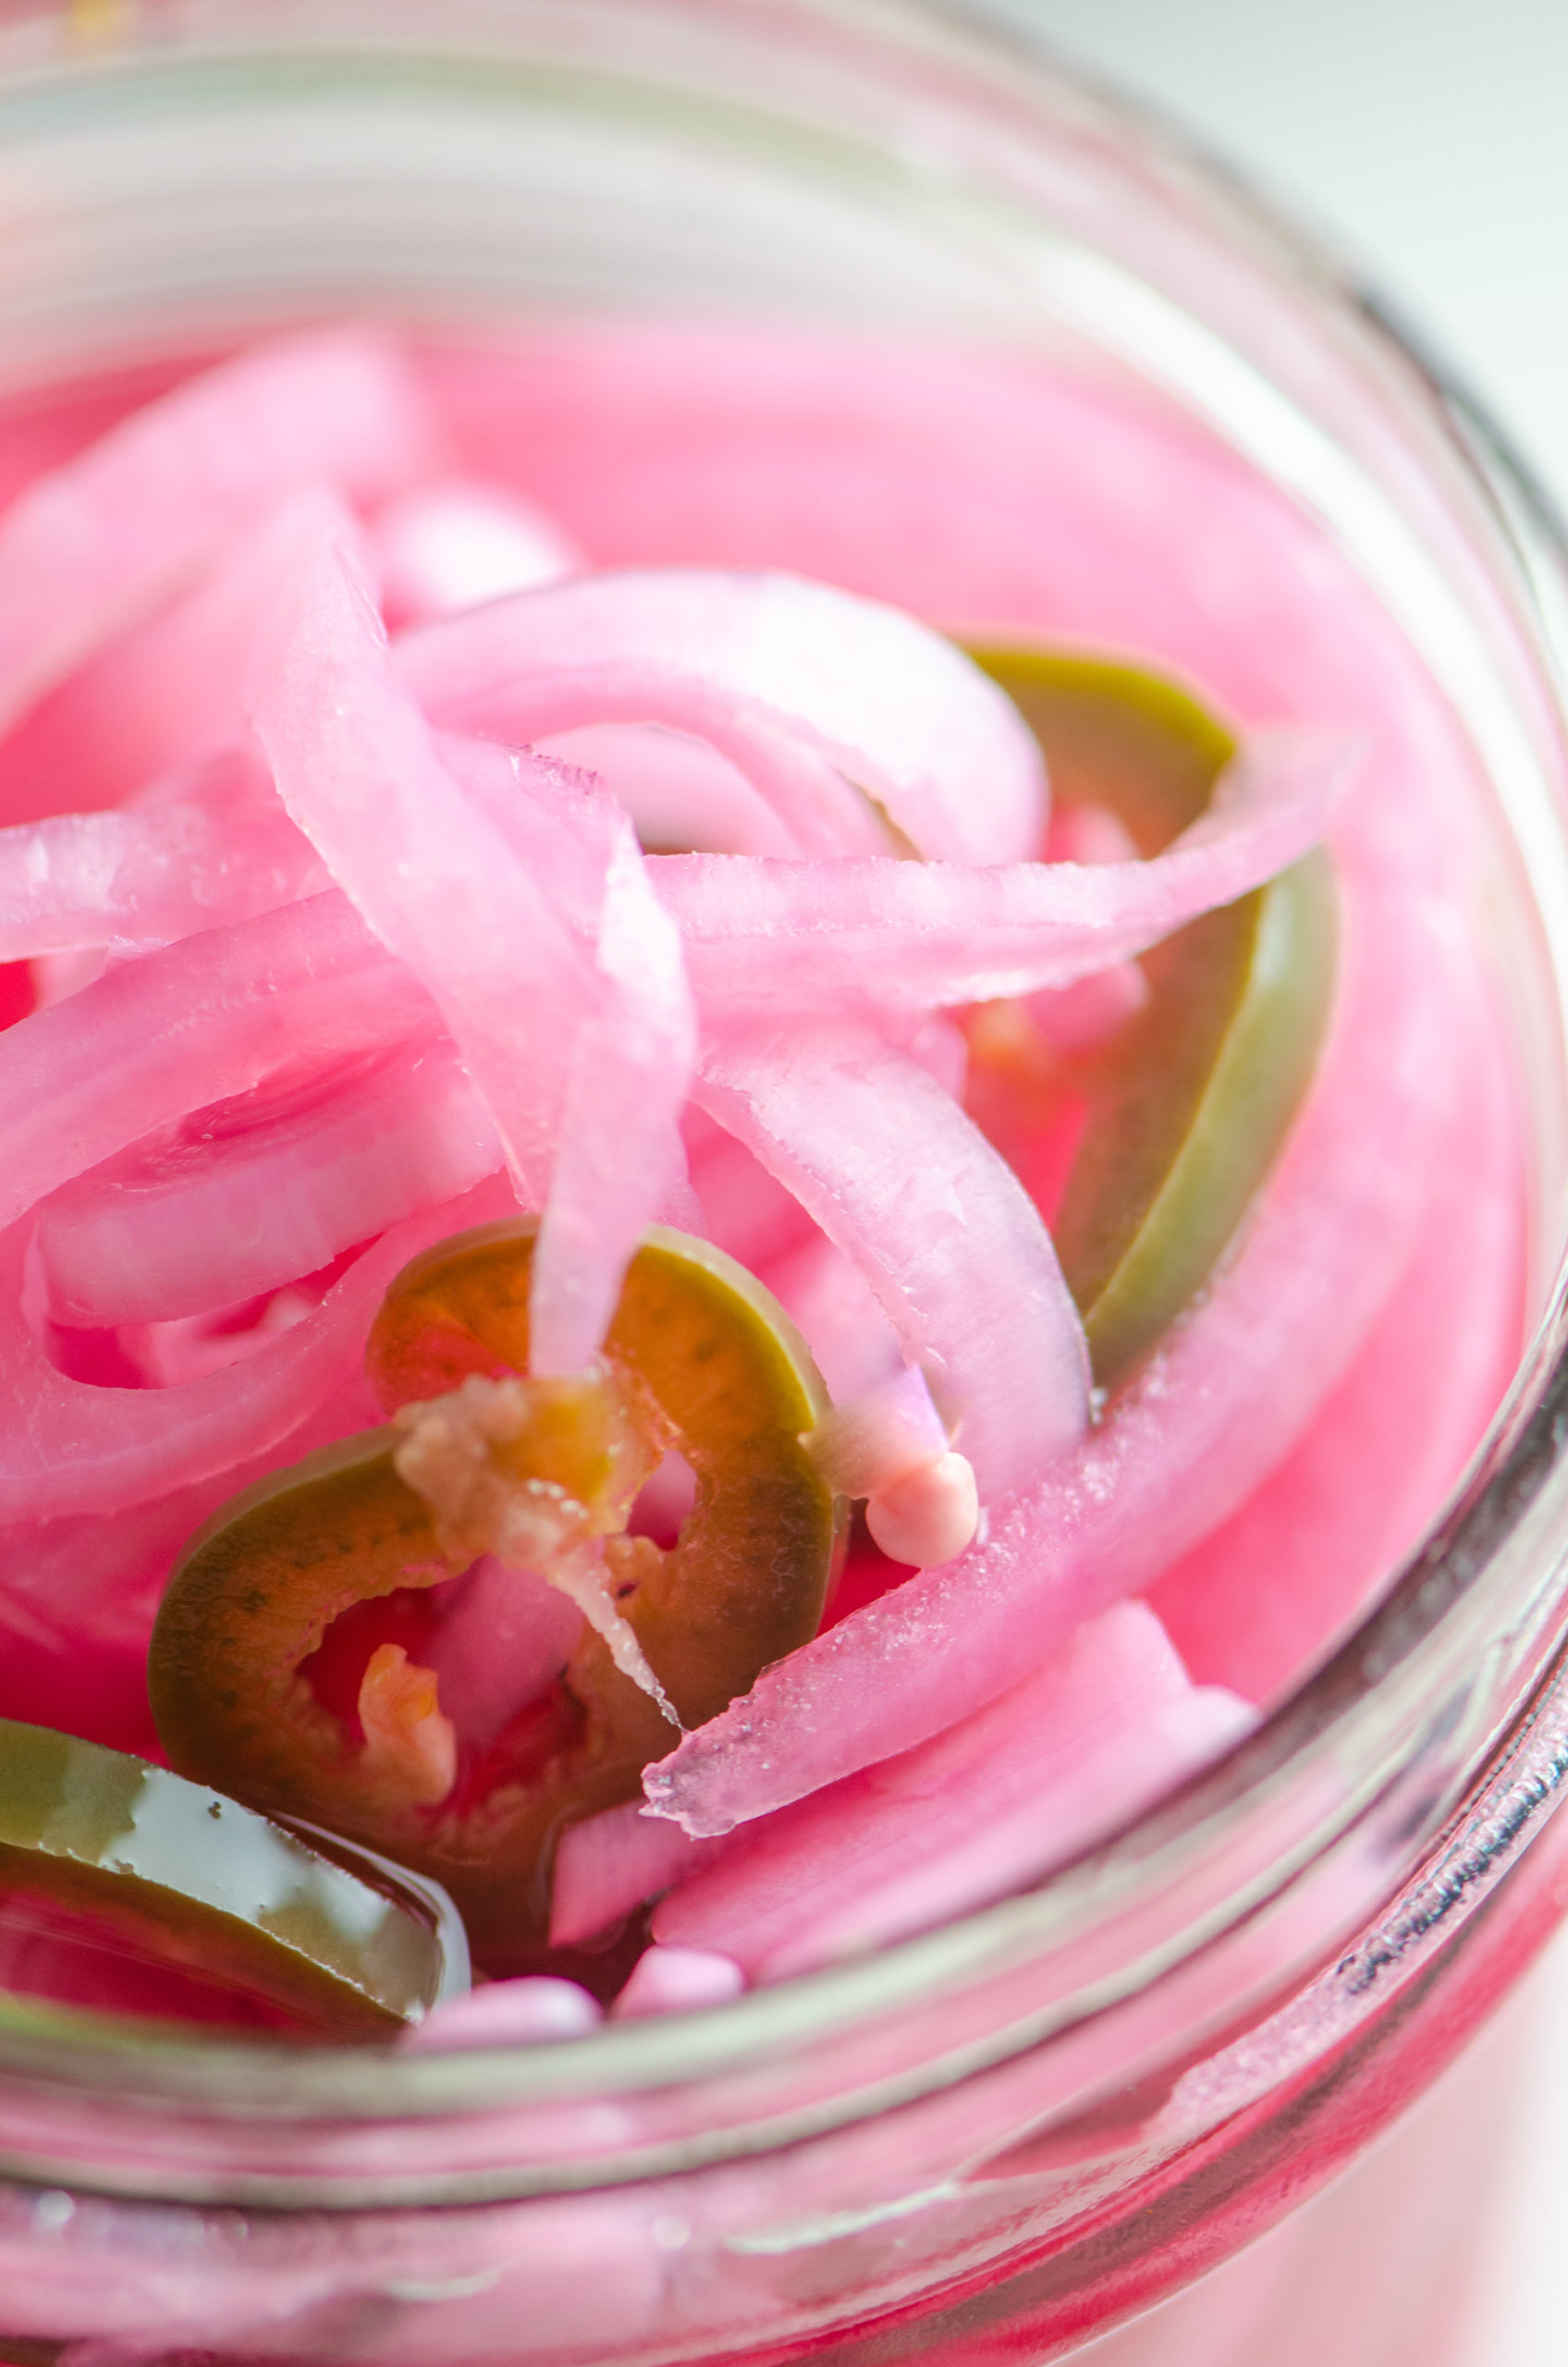 Pickled Pink Onions